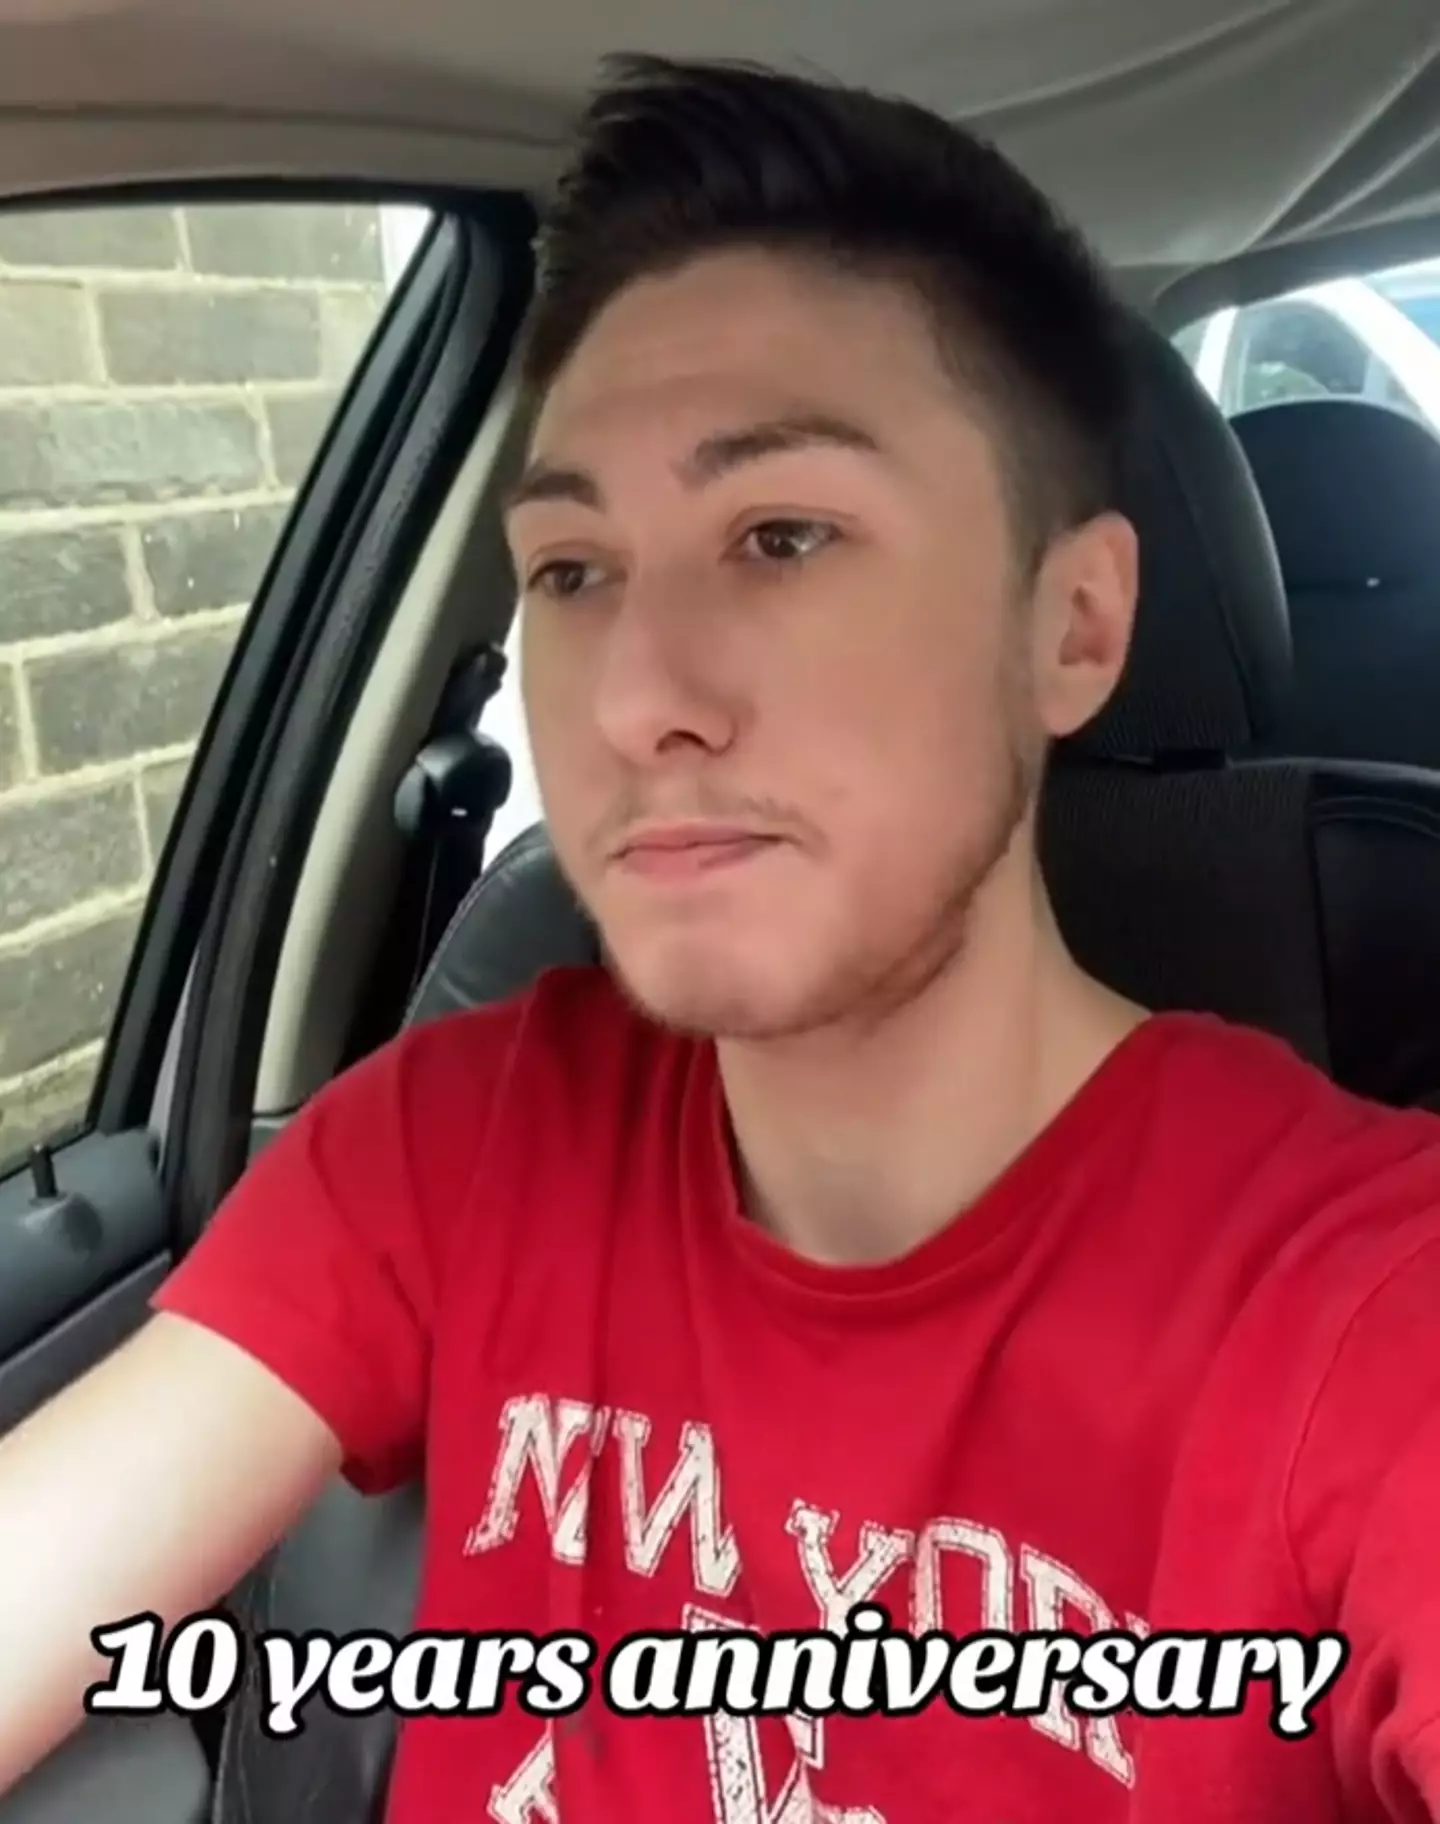 10 years later and he's still in his mum's car going 'broom broom'. (TikTok/@tristansimmondsofficial)